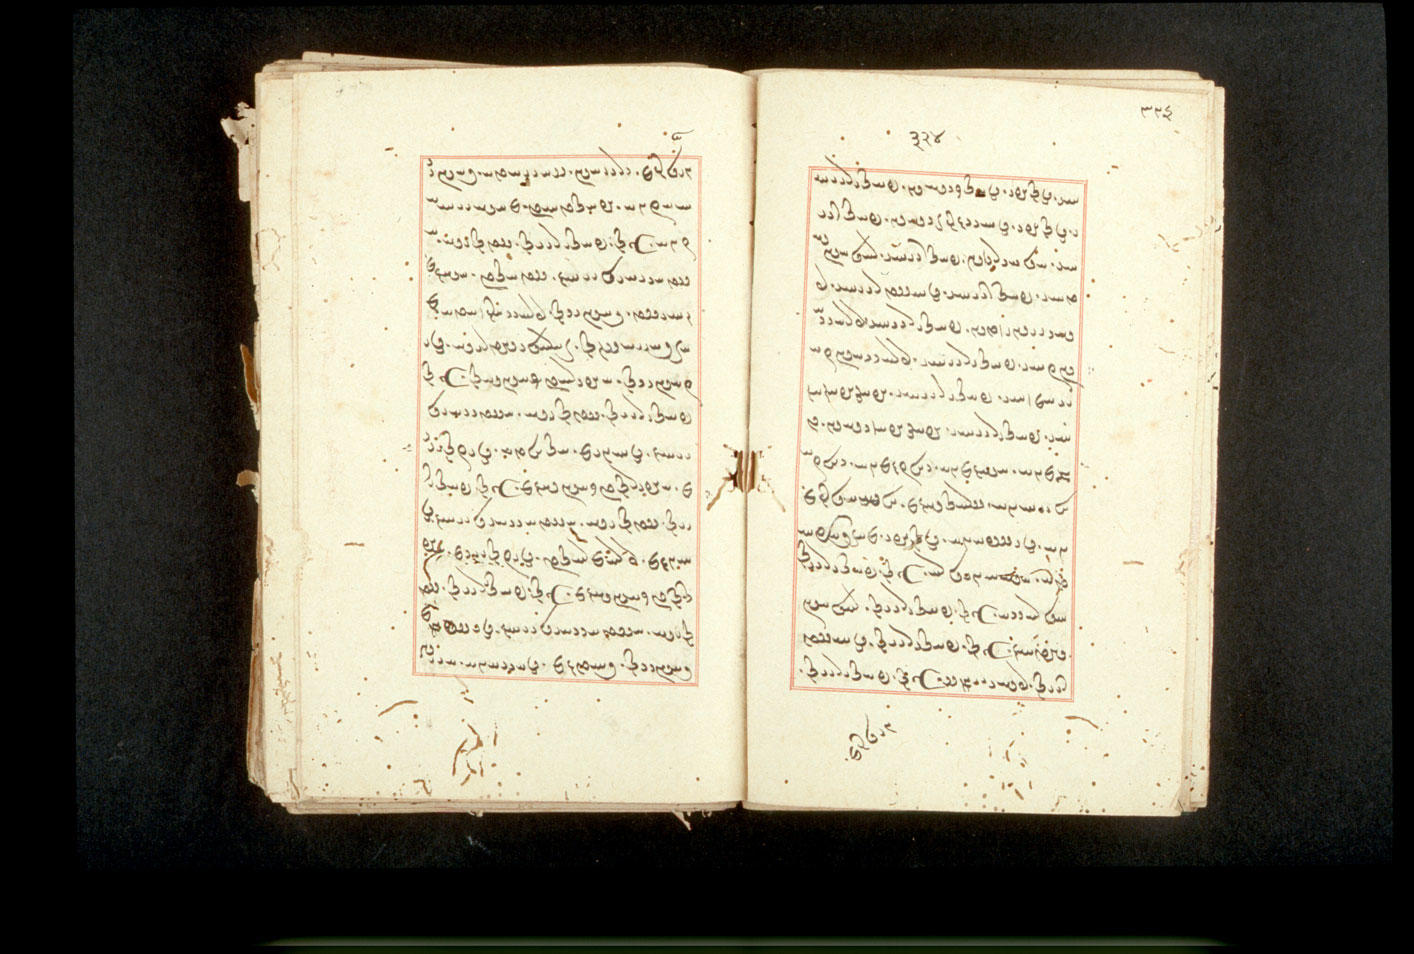 Folios 324v (right) and 325r (left)